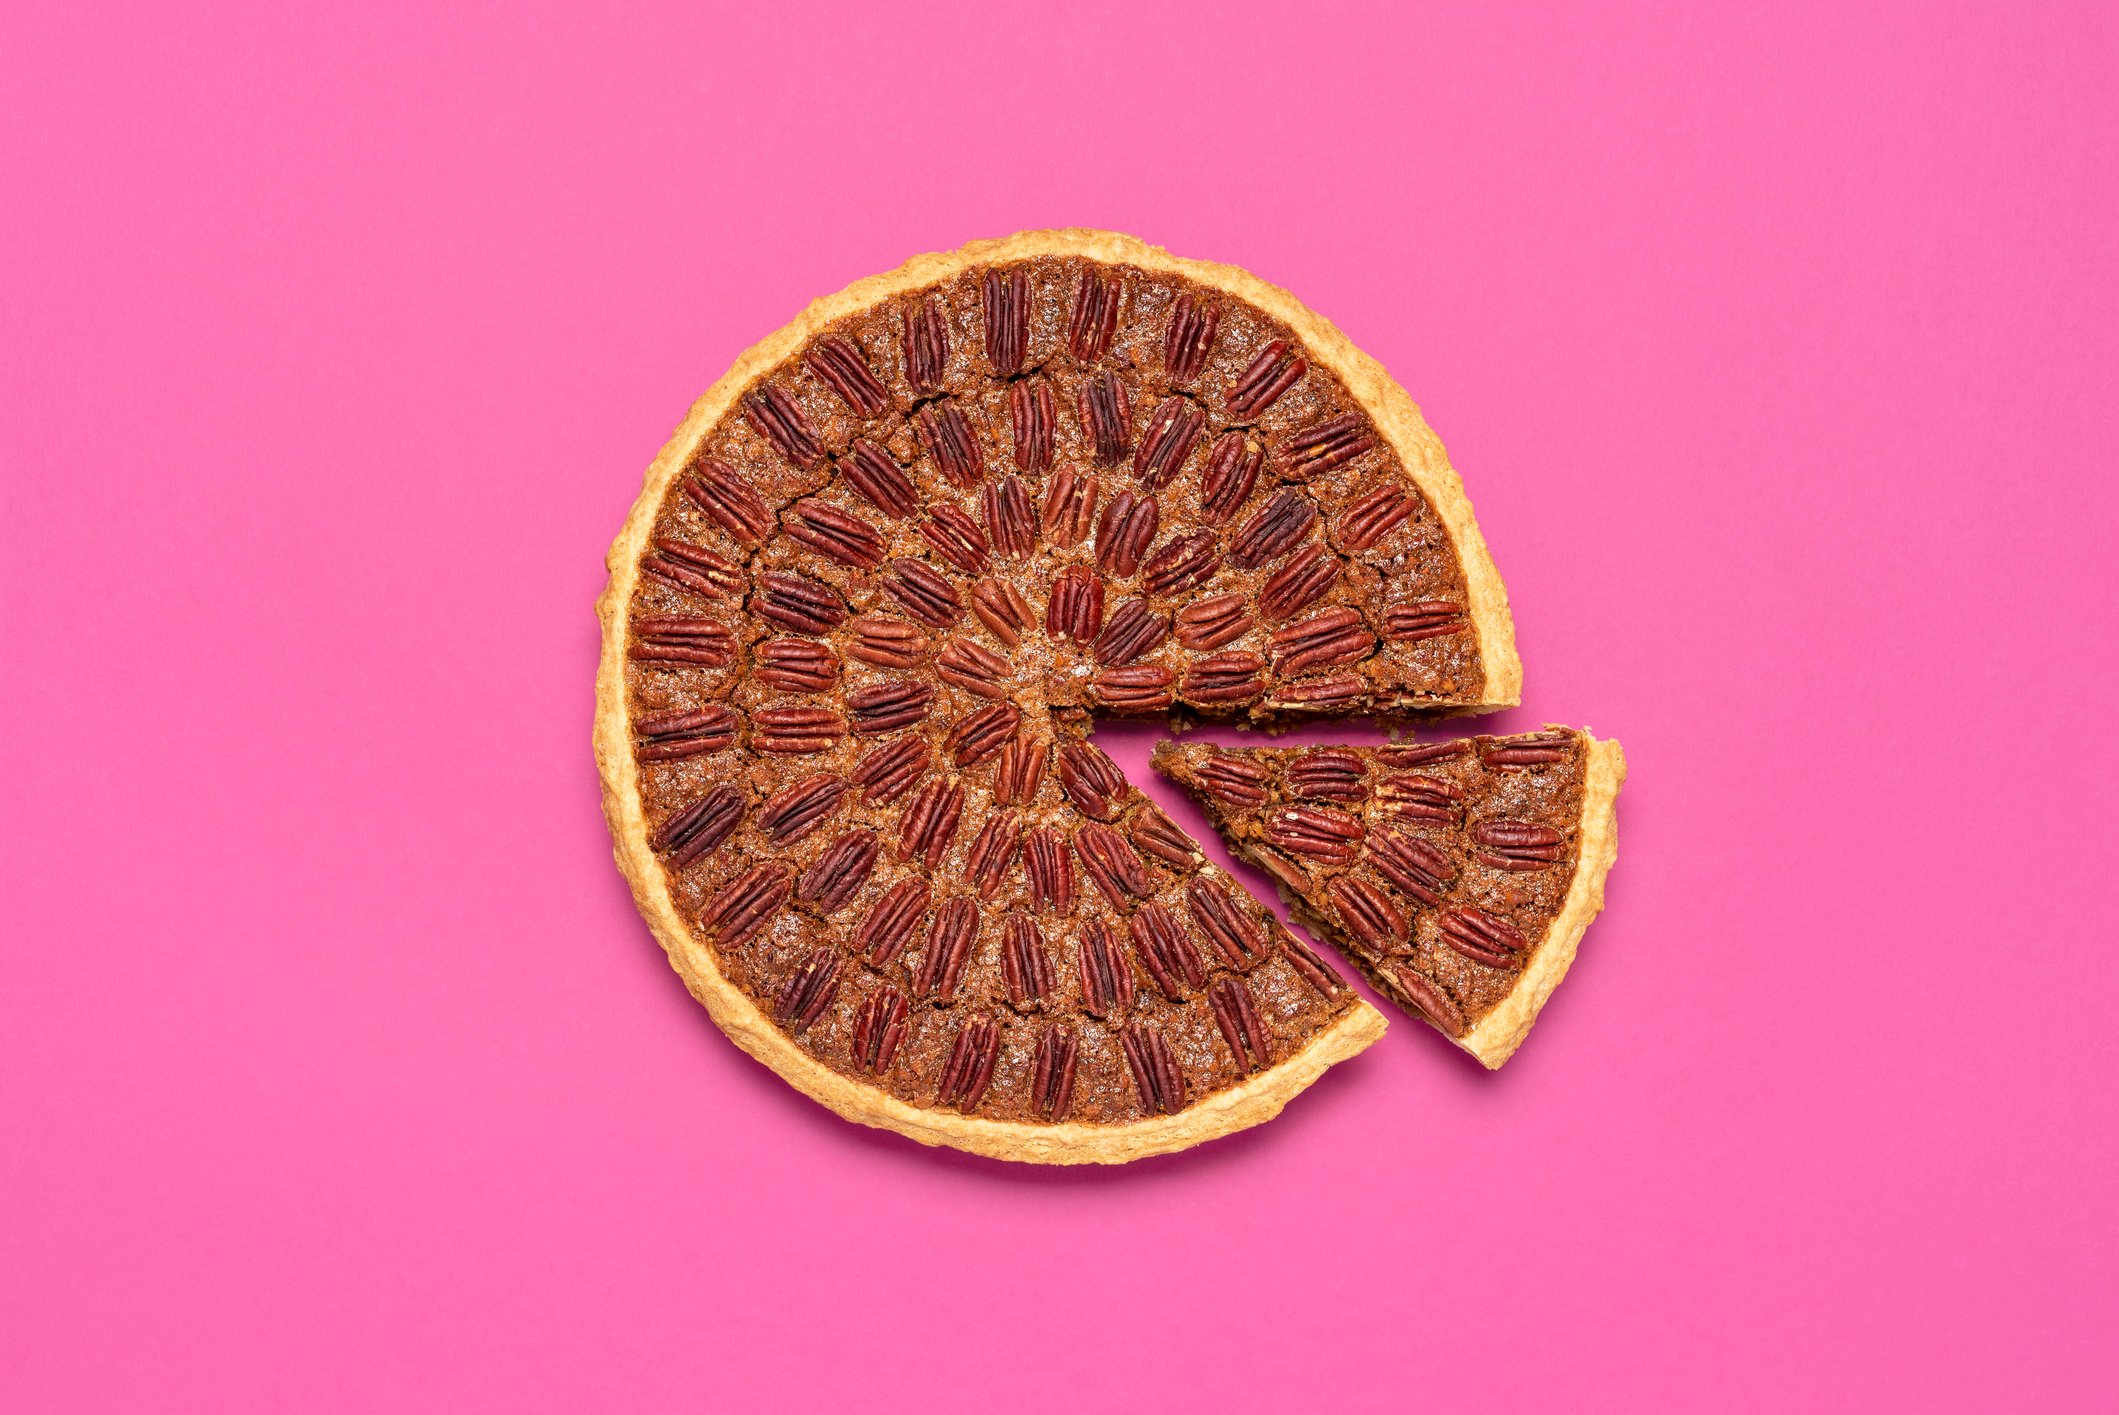 Pecan pie on pink background with a slice pulled out.